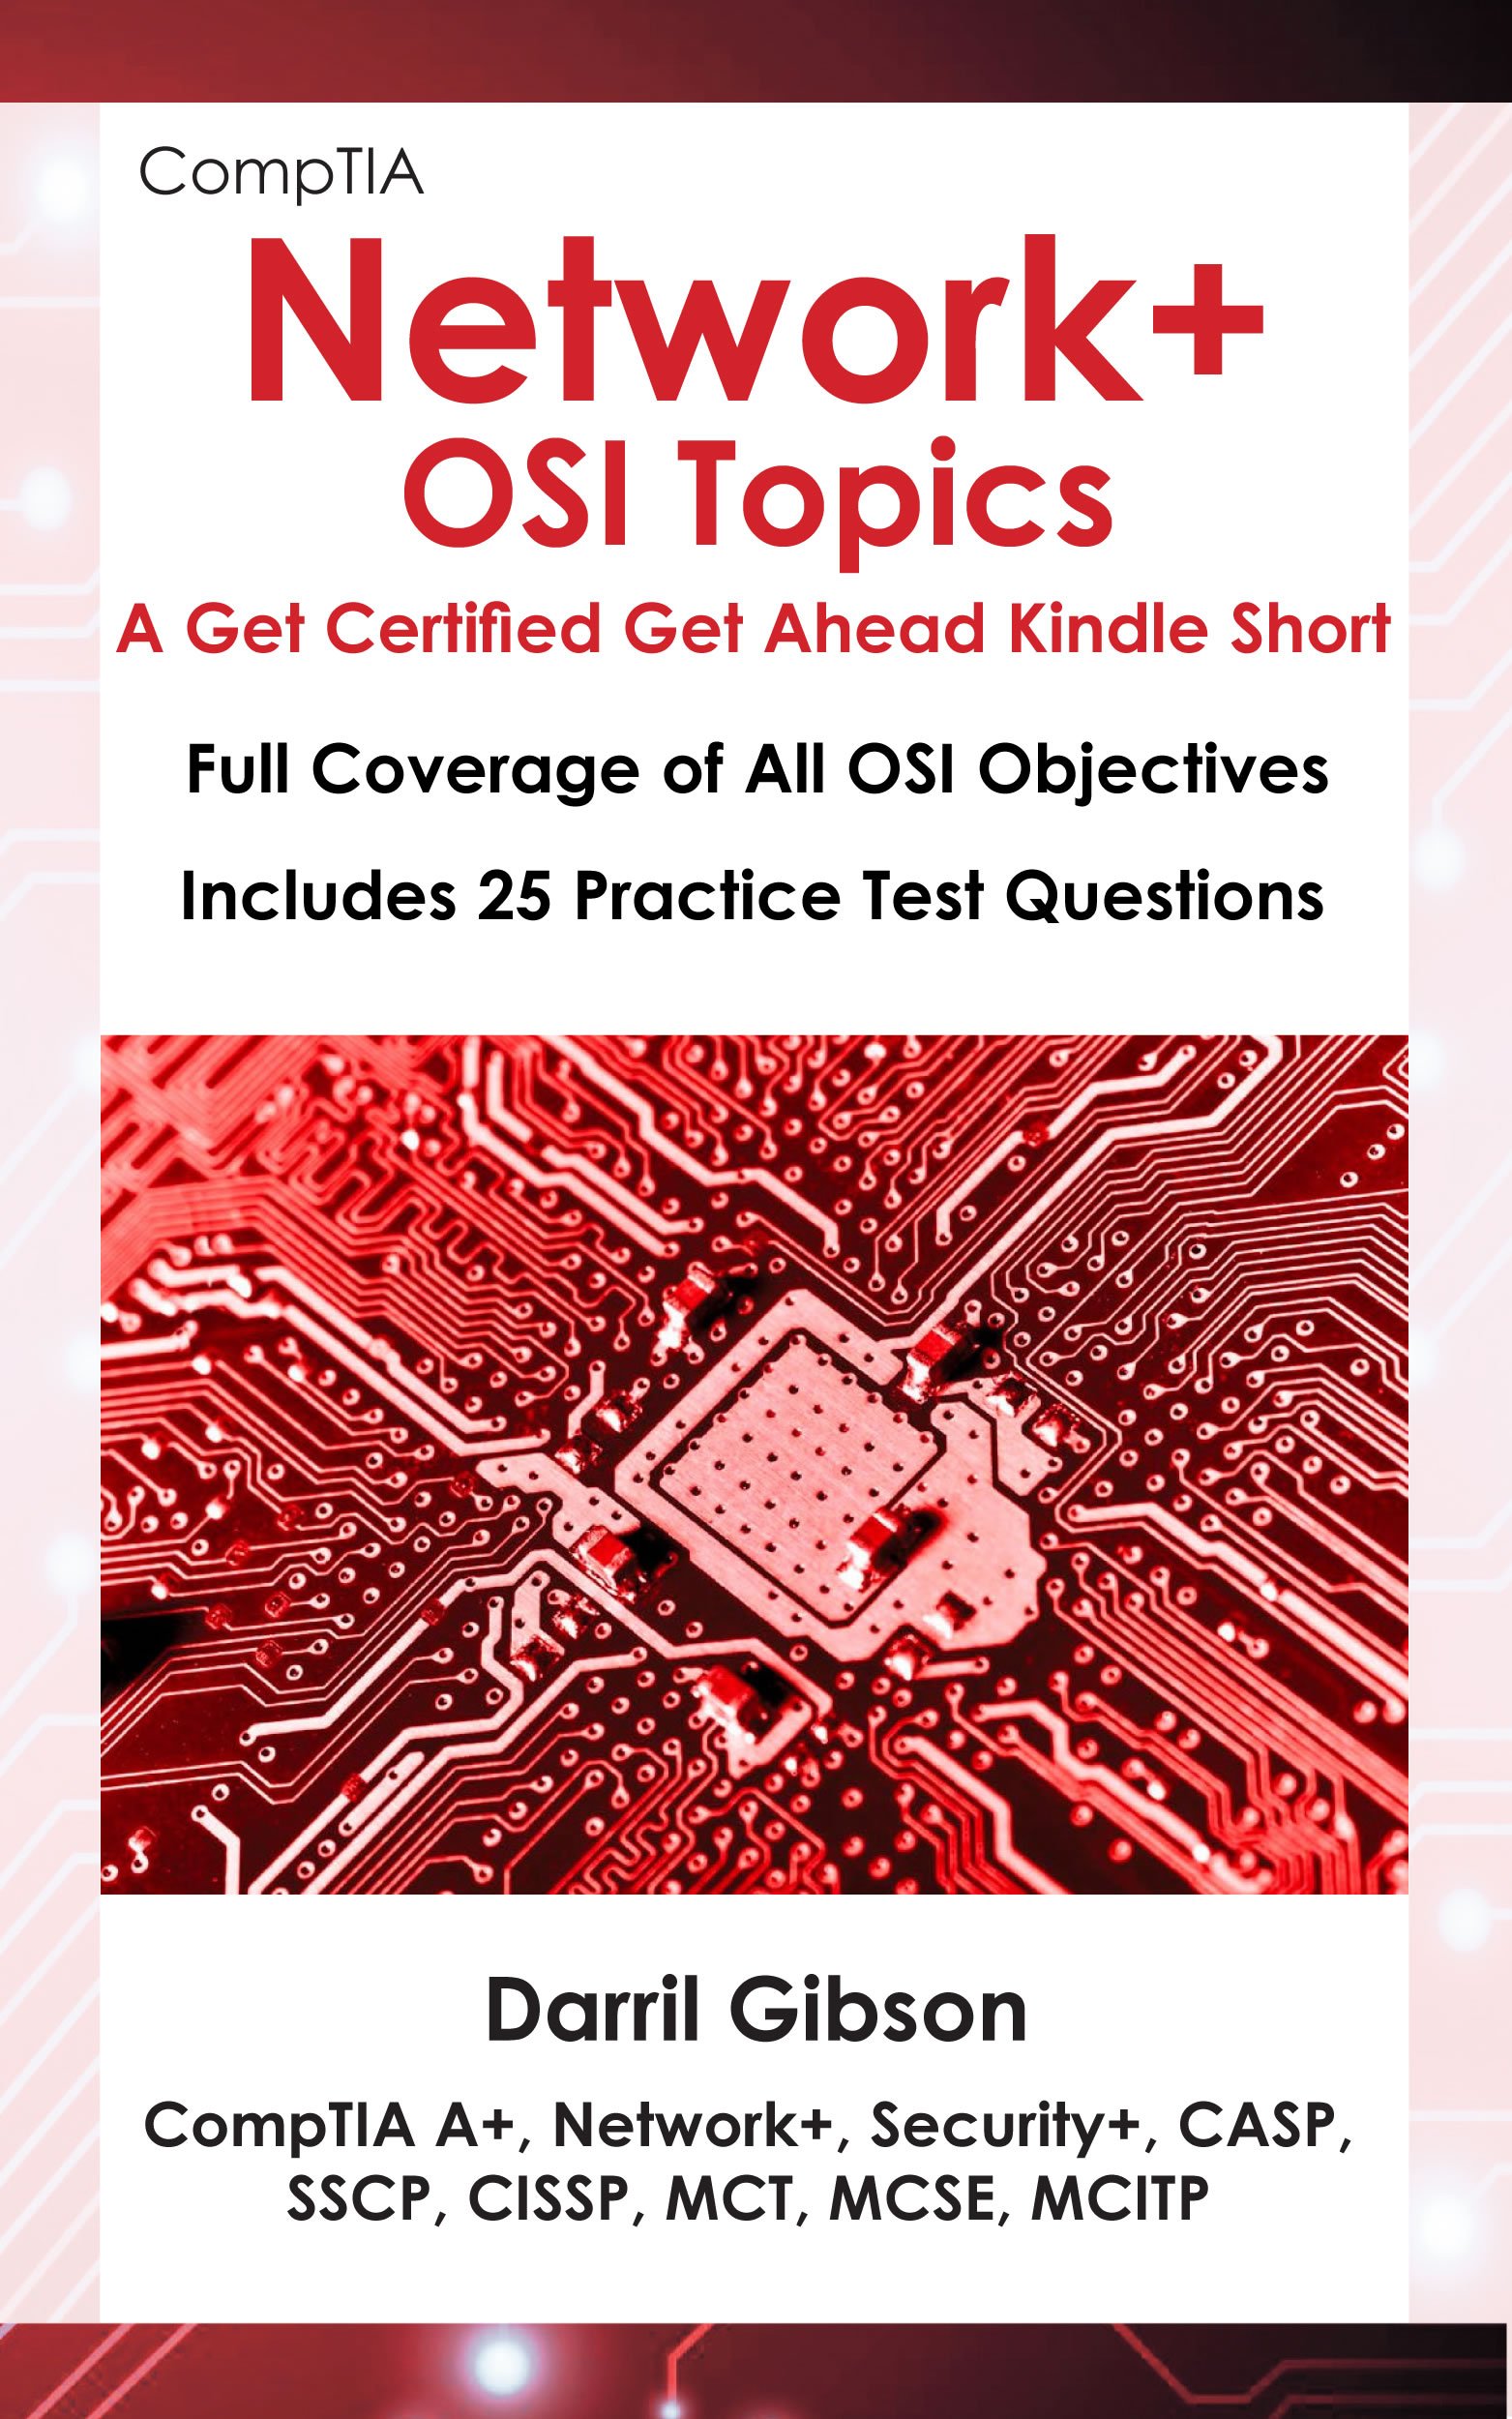 CompTIA Network+ OSI Topics (A Get Certified Get Ahead Kindle Short)